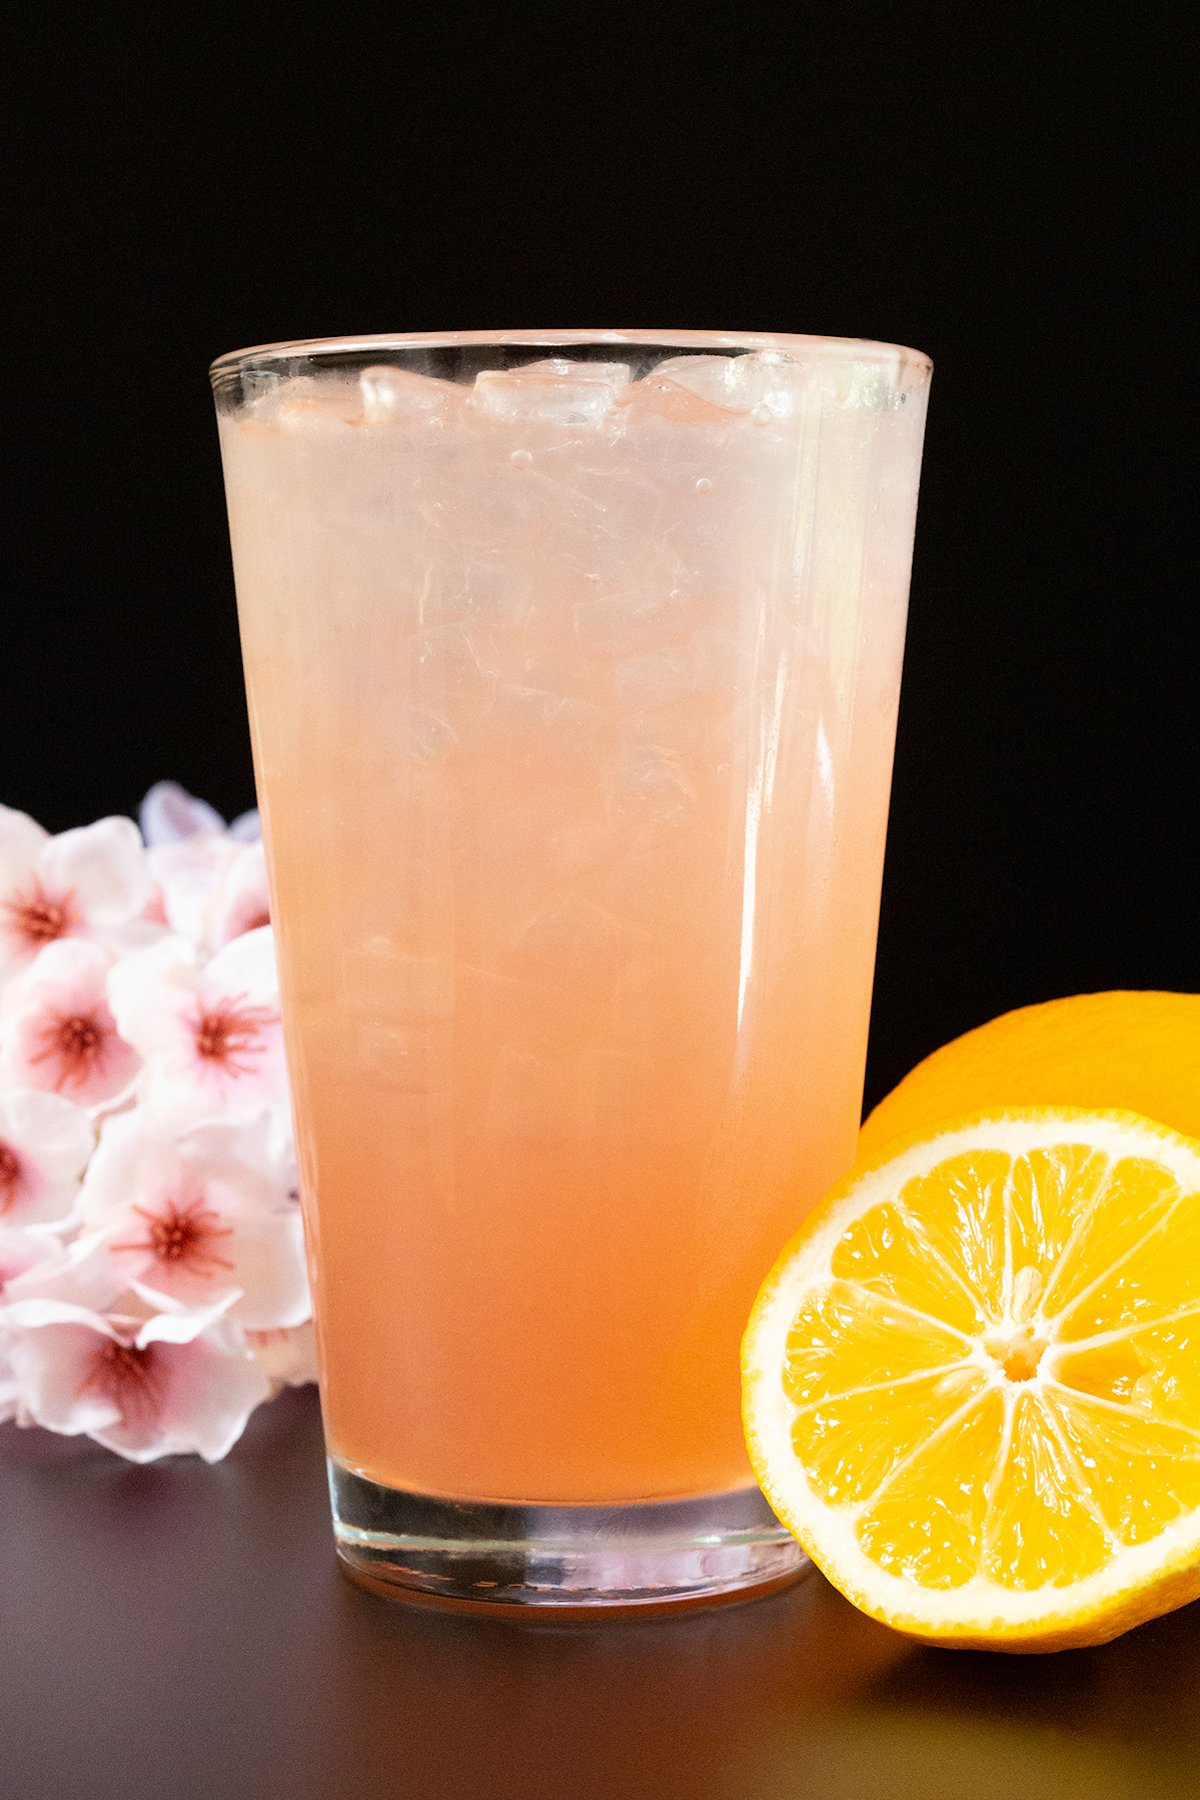 A pint glass filled with a light pink lemonade. Cherry blossoms and a sliced lemon are out of focus in the background.